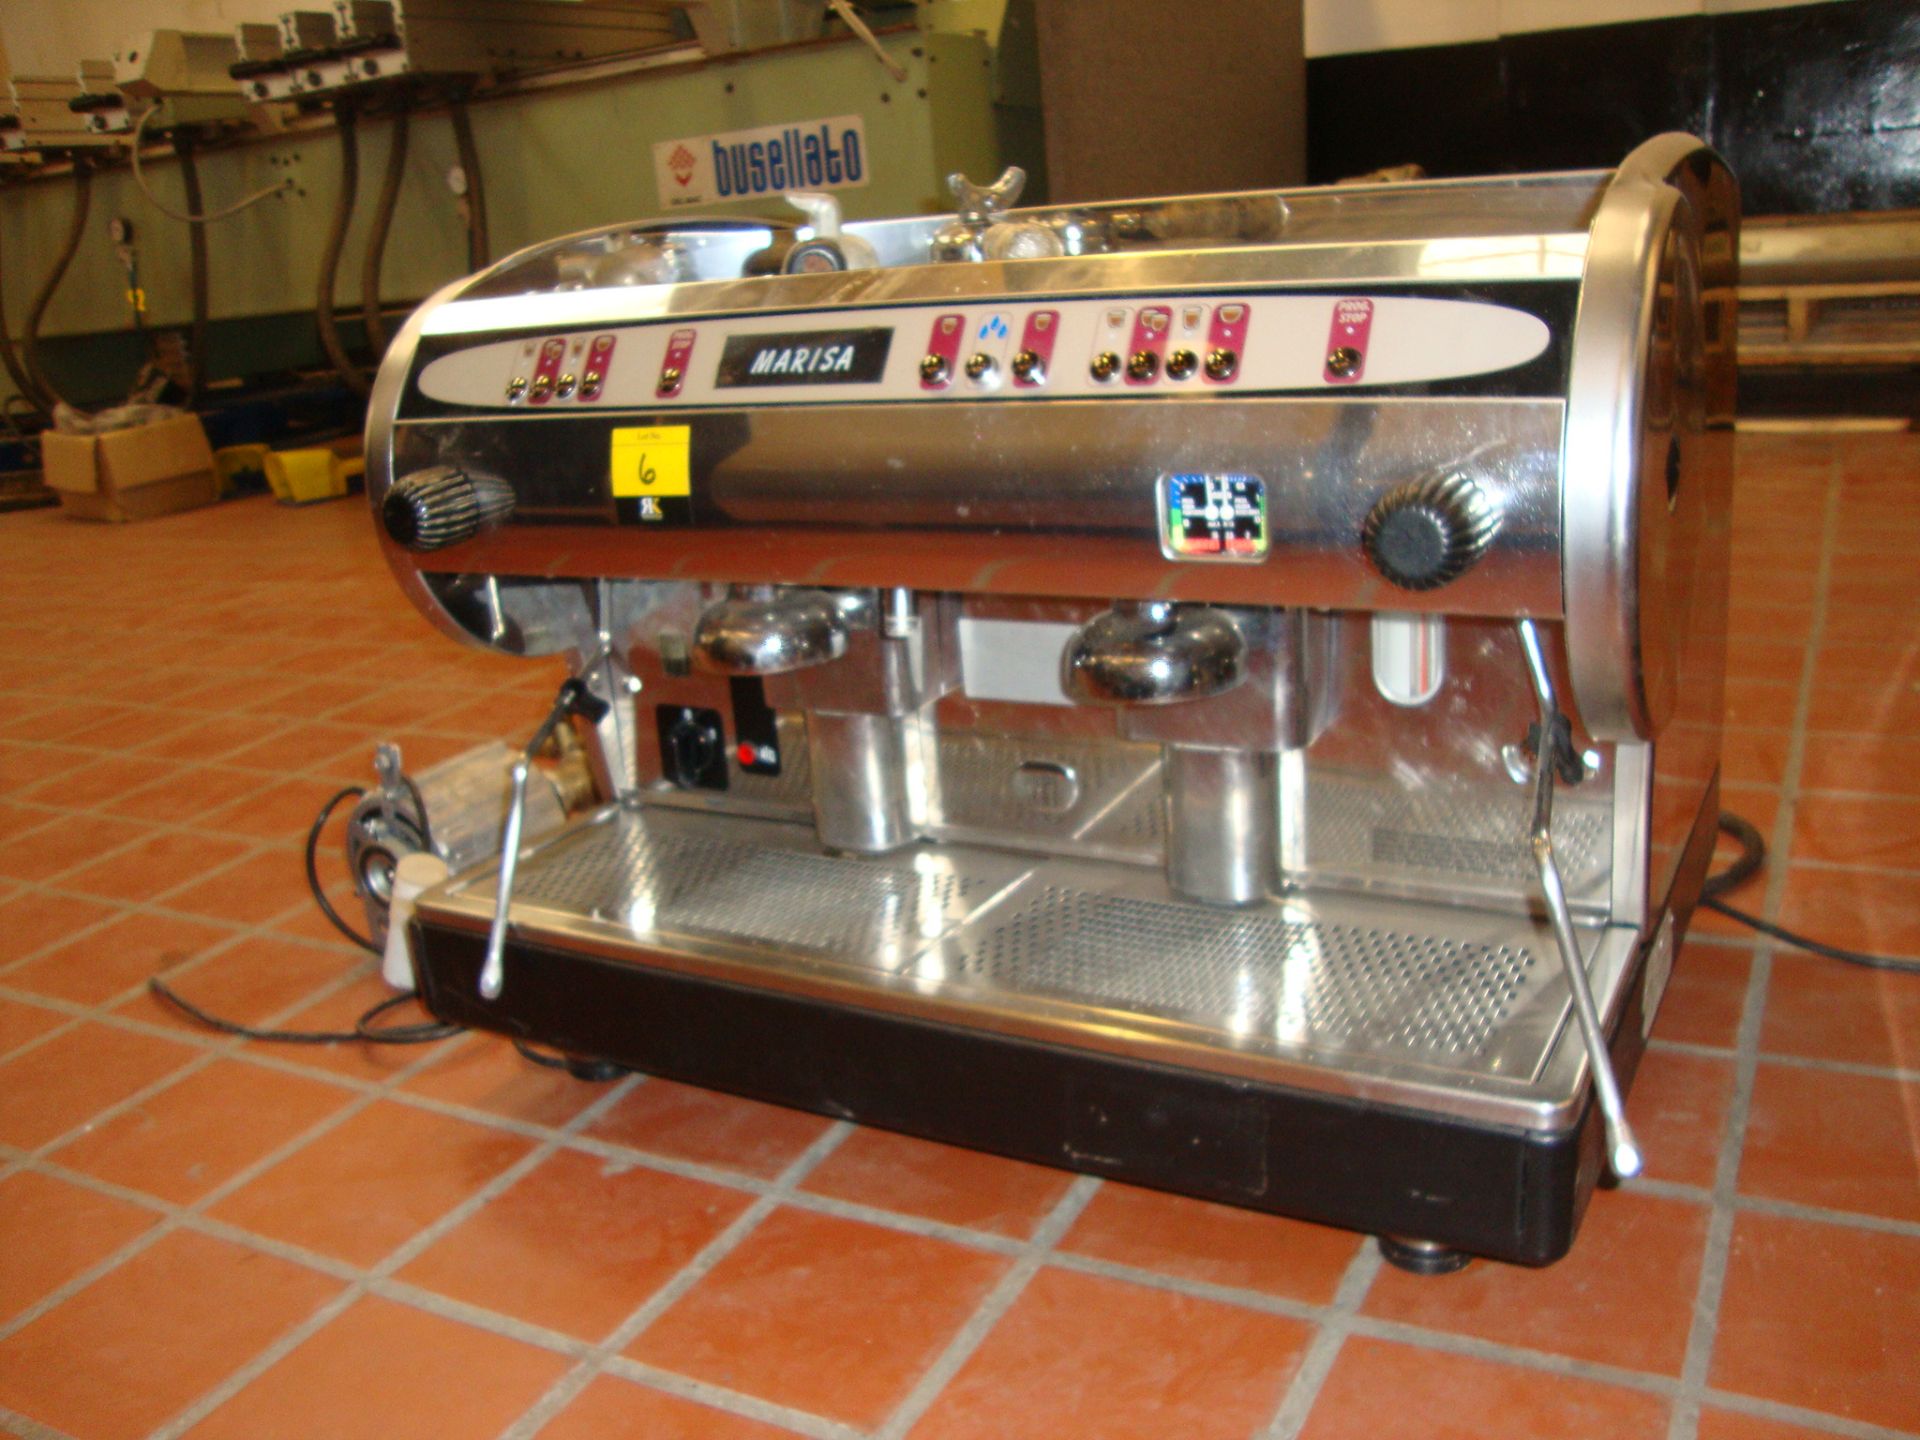 Marisa stainless steel twin head commercial coffee machine including pump pictured to side of